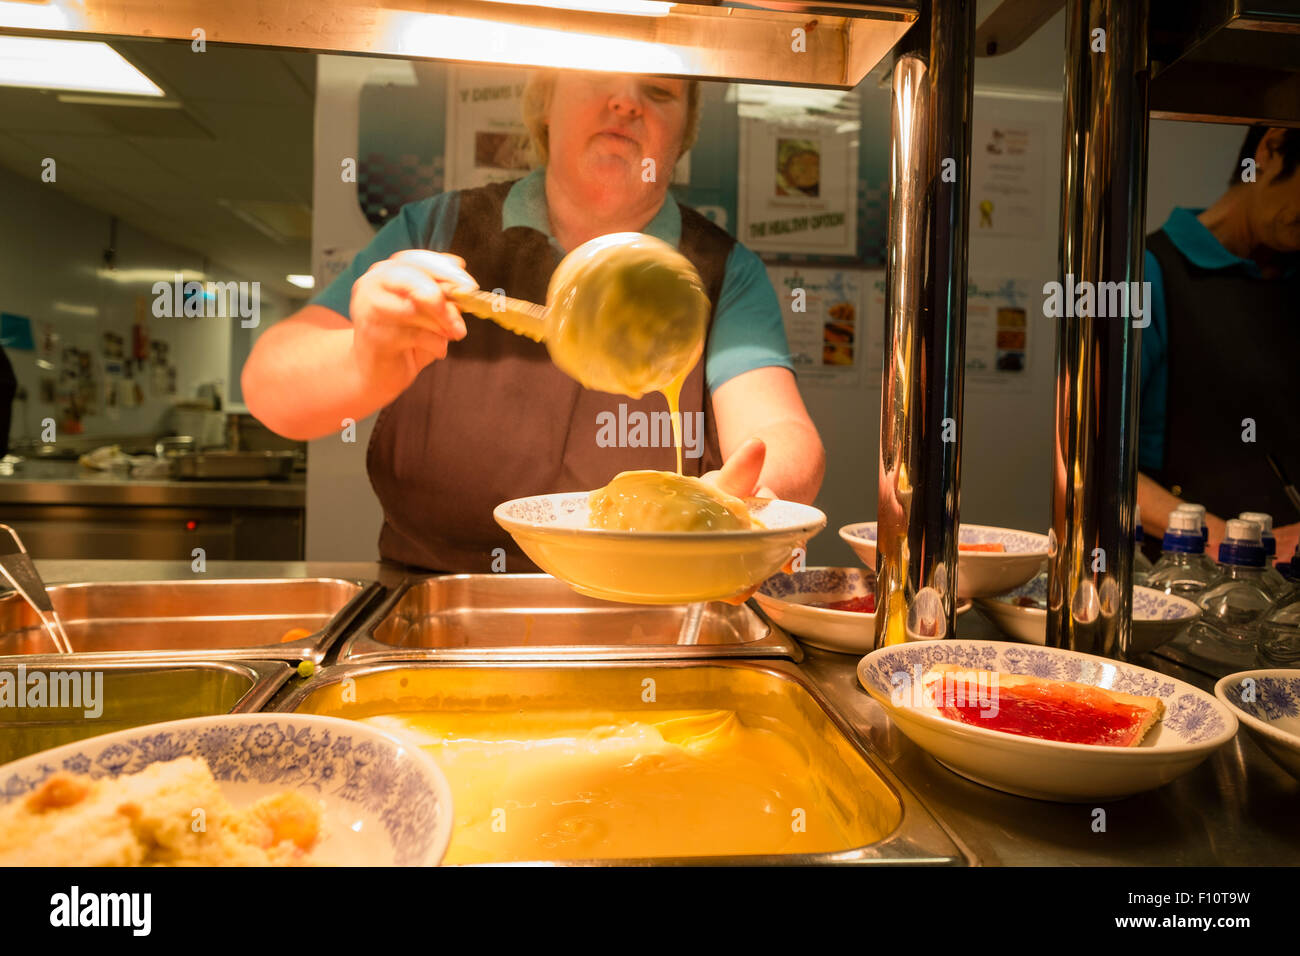 School dinners: A woman dinner lady at work pouring custard over a pudding at a school canteen cafeteria, UK Stock Photo